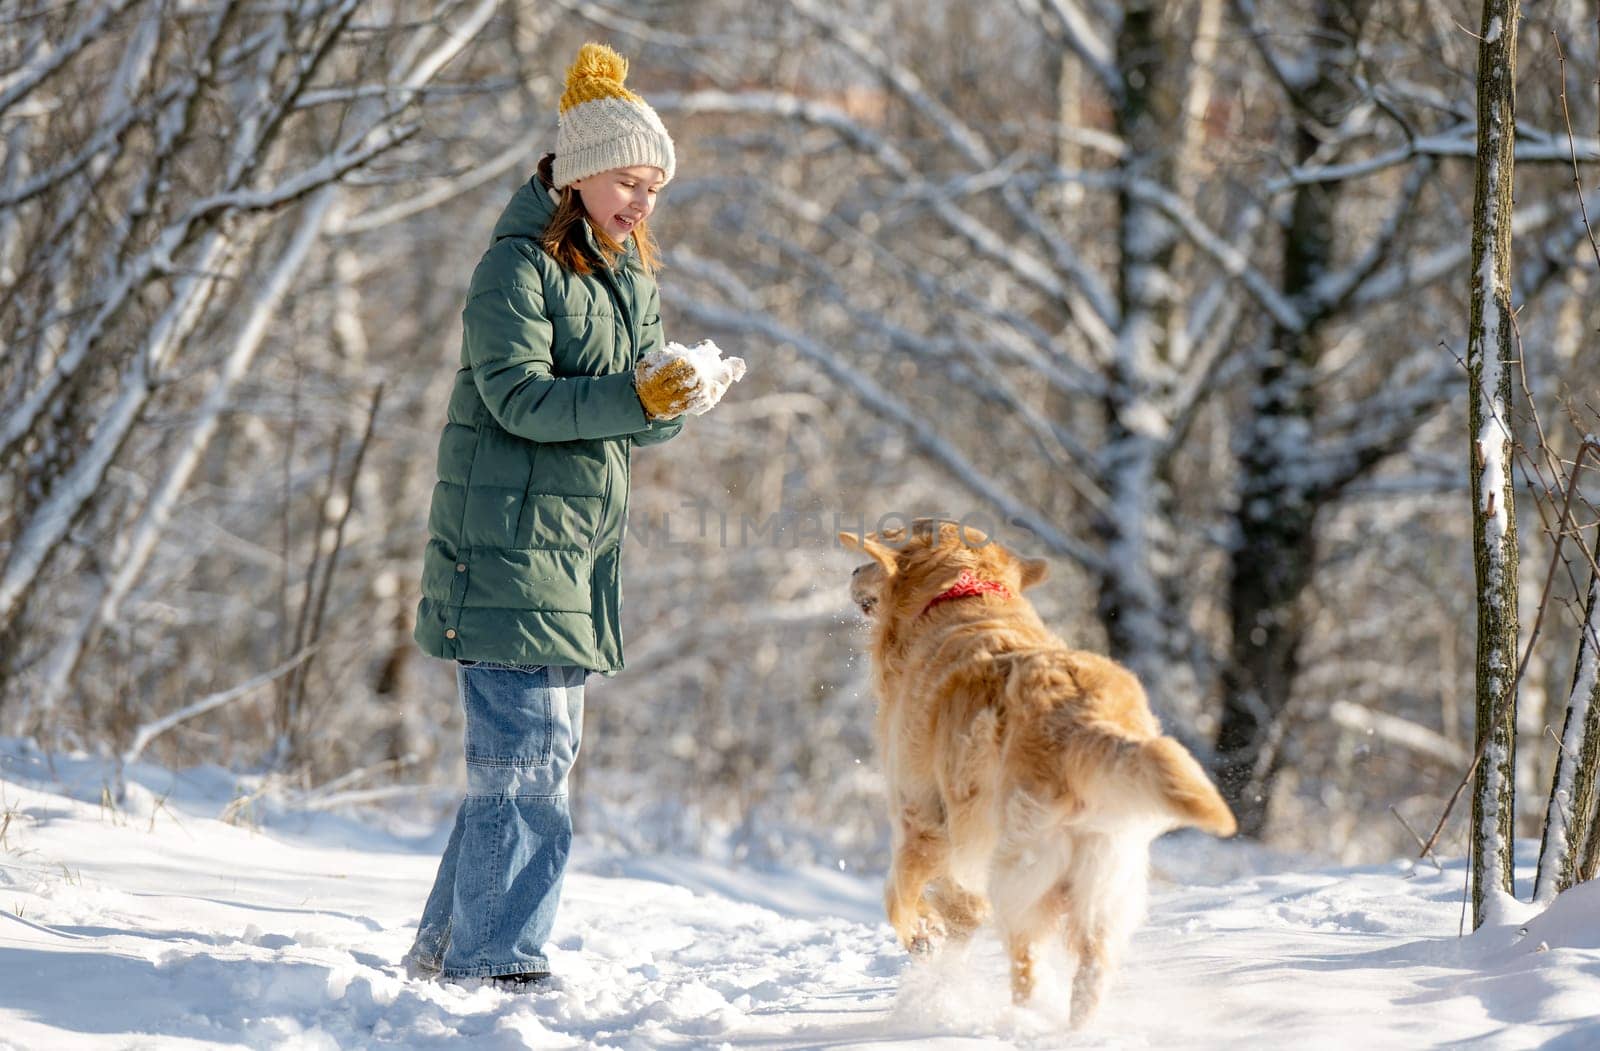 Small Girl With Golden Retriever In Winter Forest by tan4ikk1